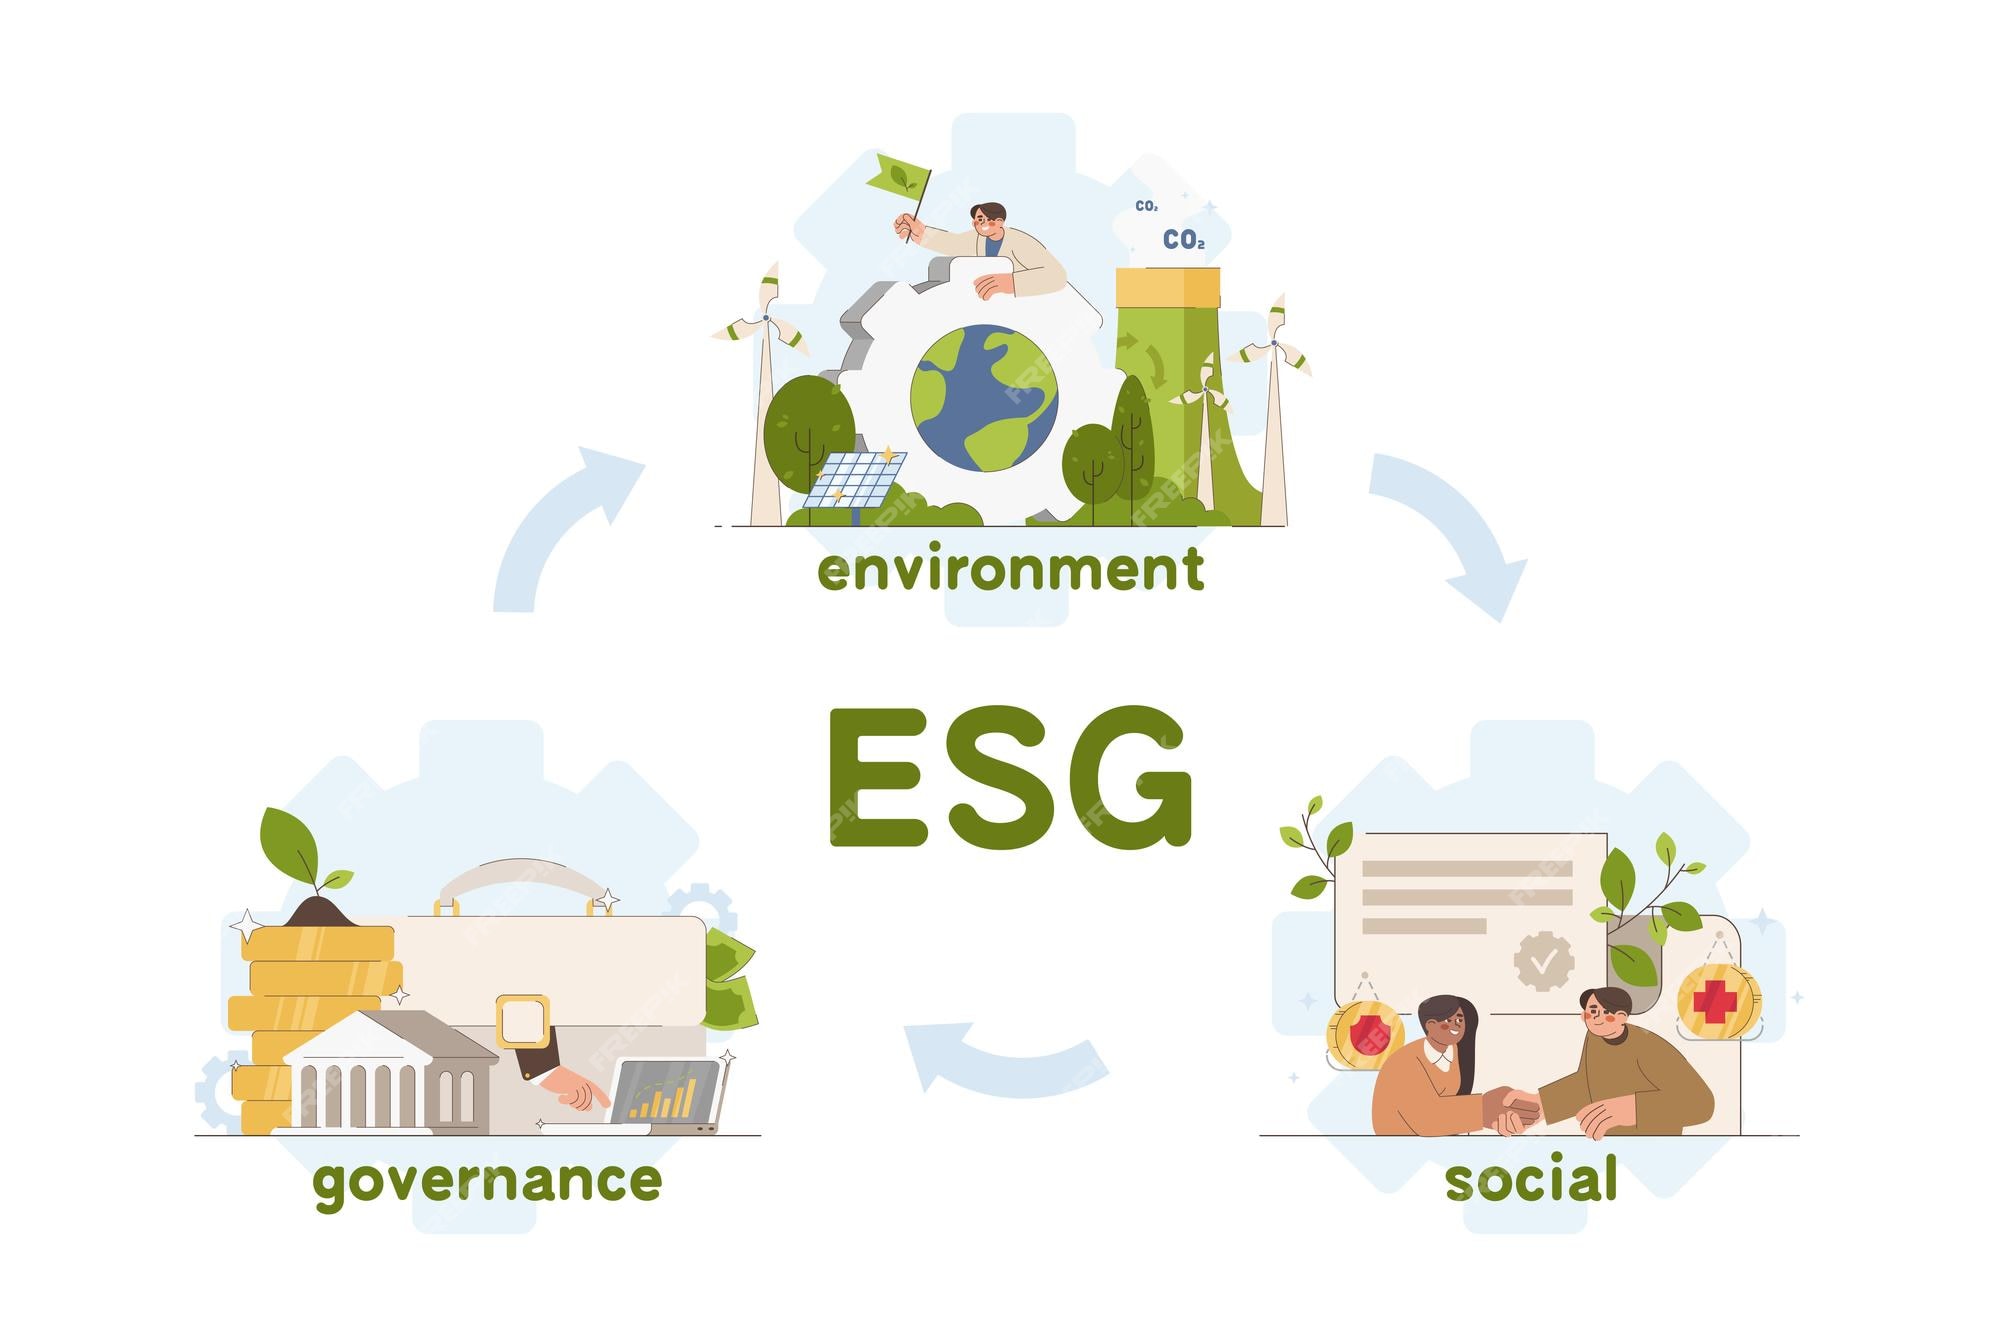 Graphic of environment social and governance aspects of ESG in arrow circle